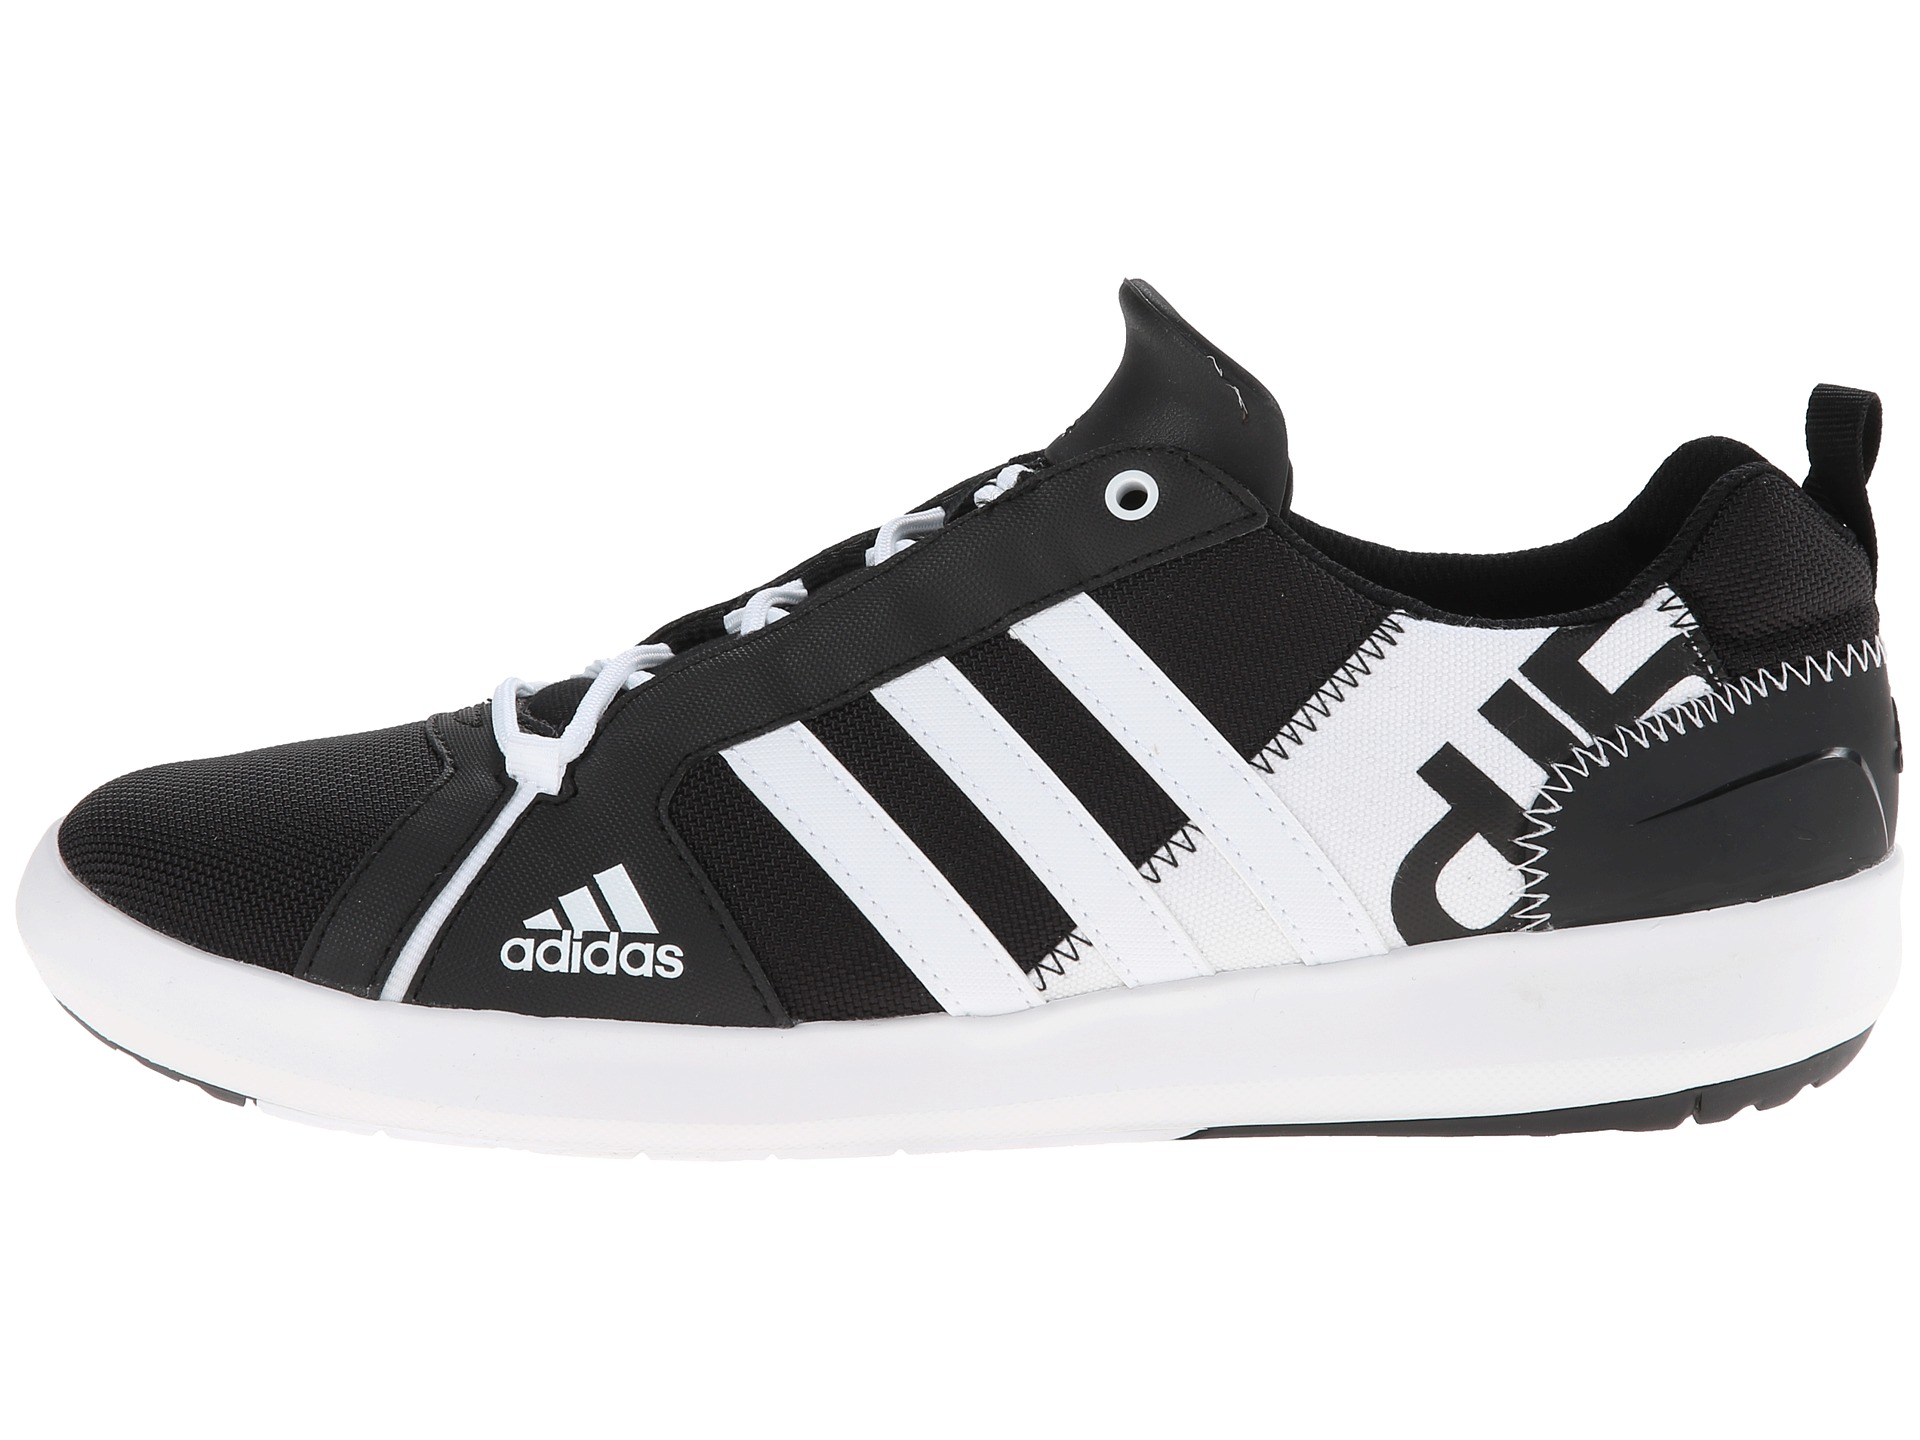 adidas Boat Lace Dlx in Black/White/Black (Black) for Men - Lyst